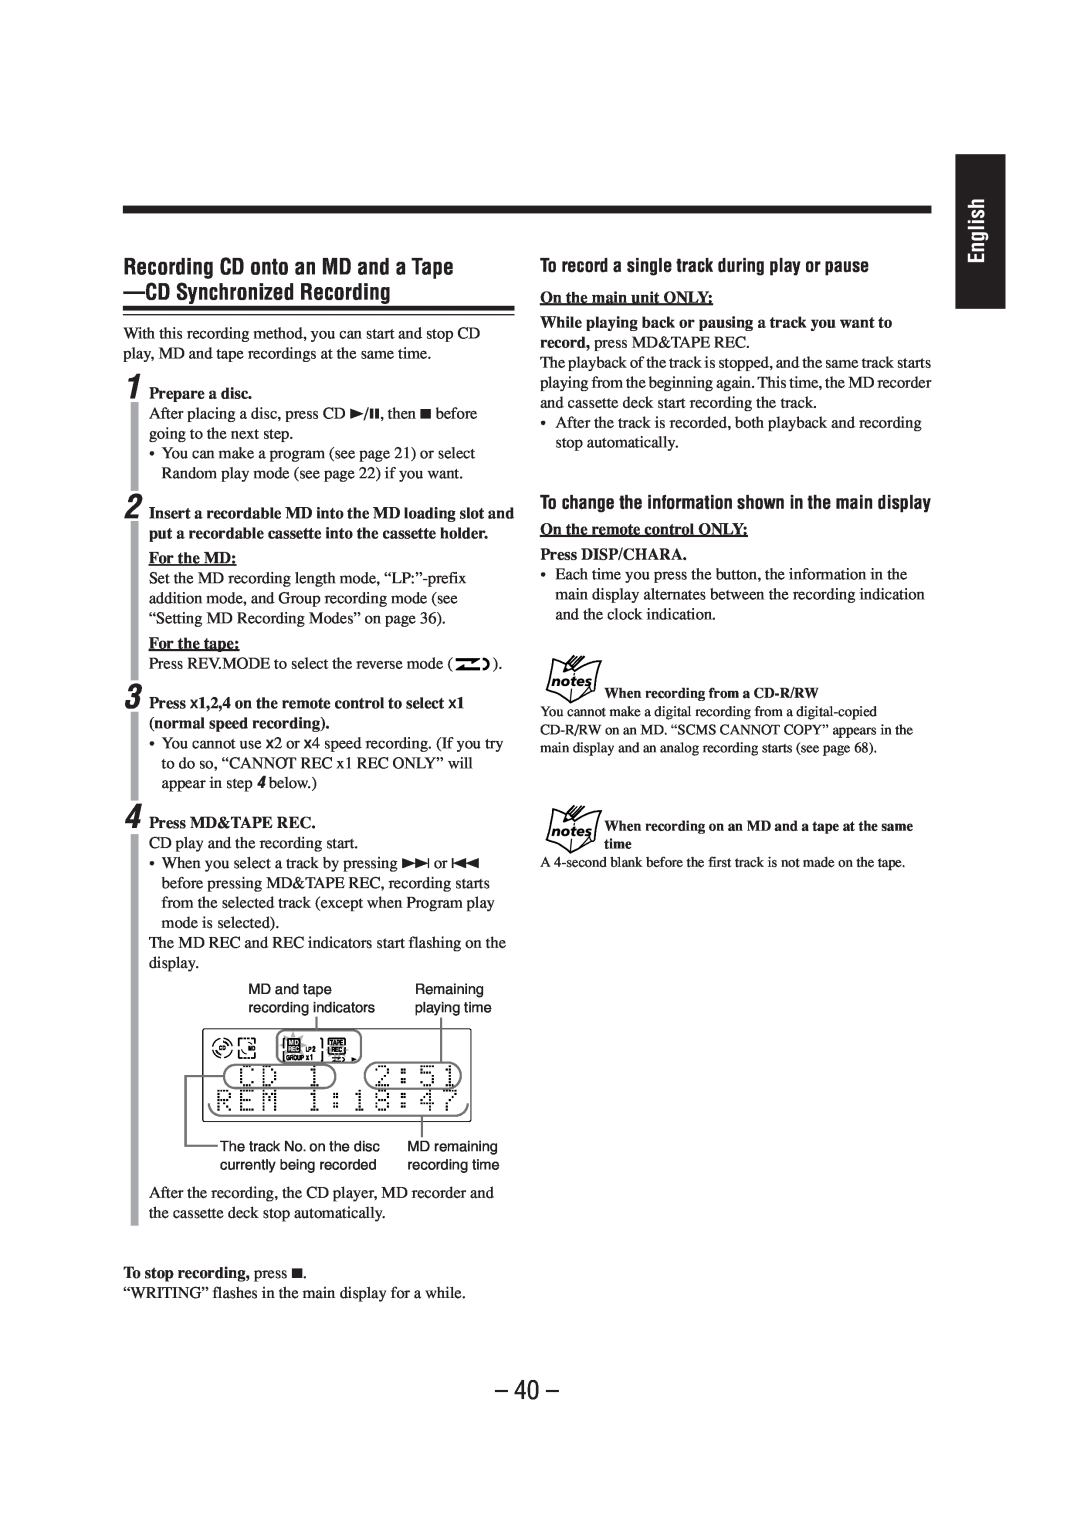 JVC CA-UXZ7MD, LVT0900-004A manual English, To record a single track during play or pause 